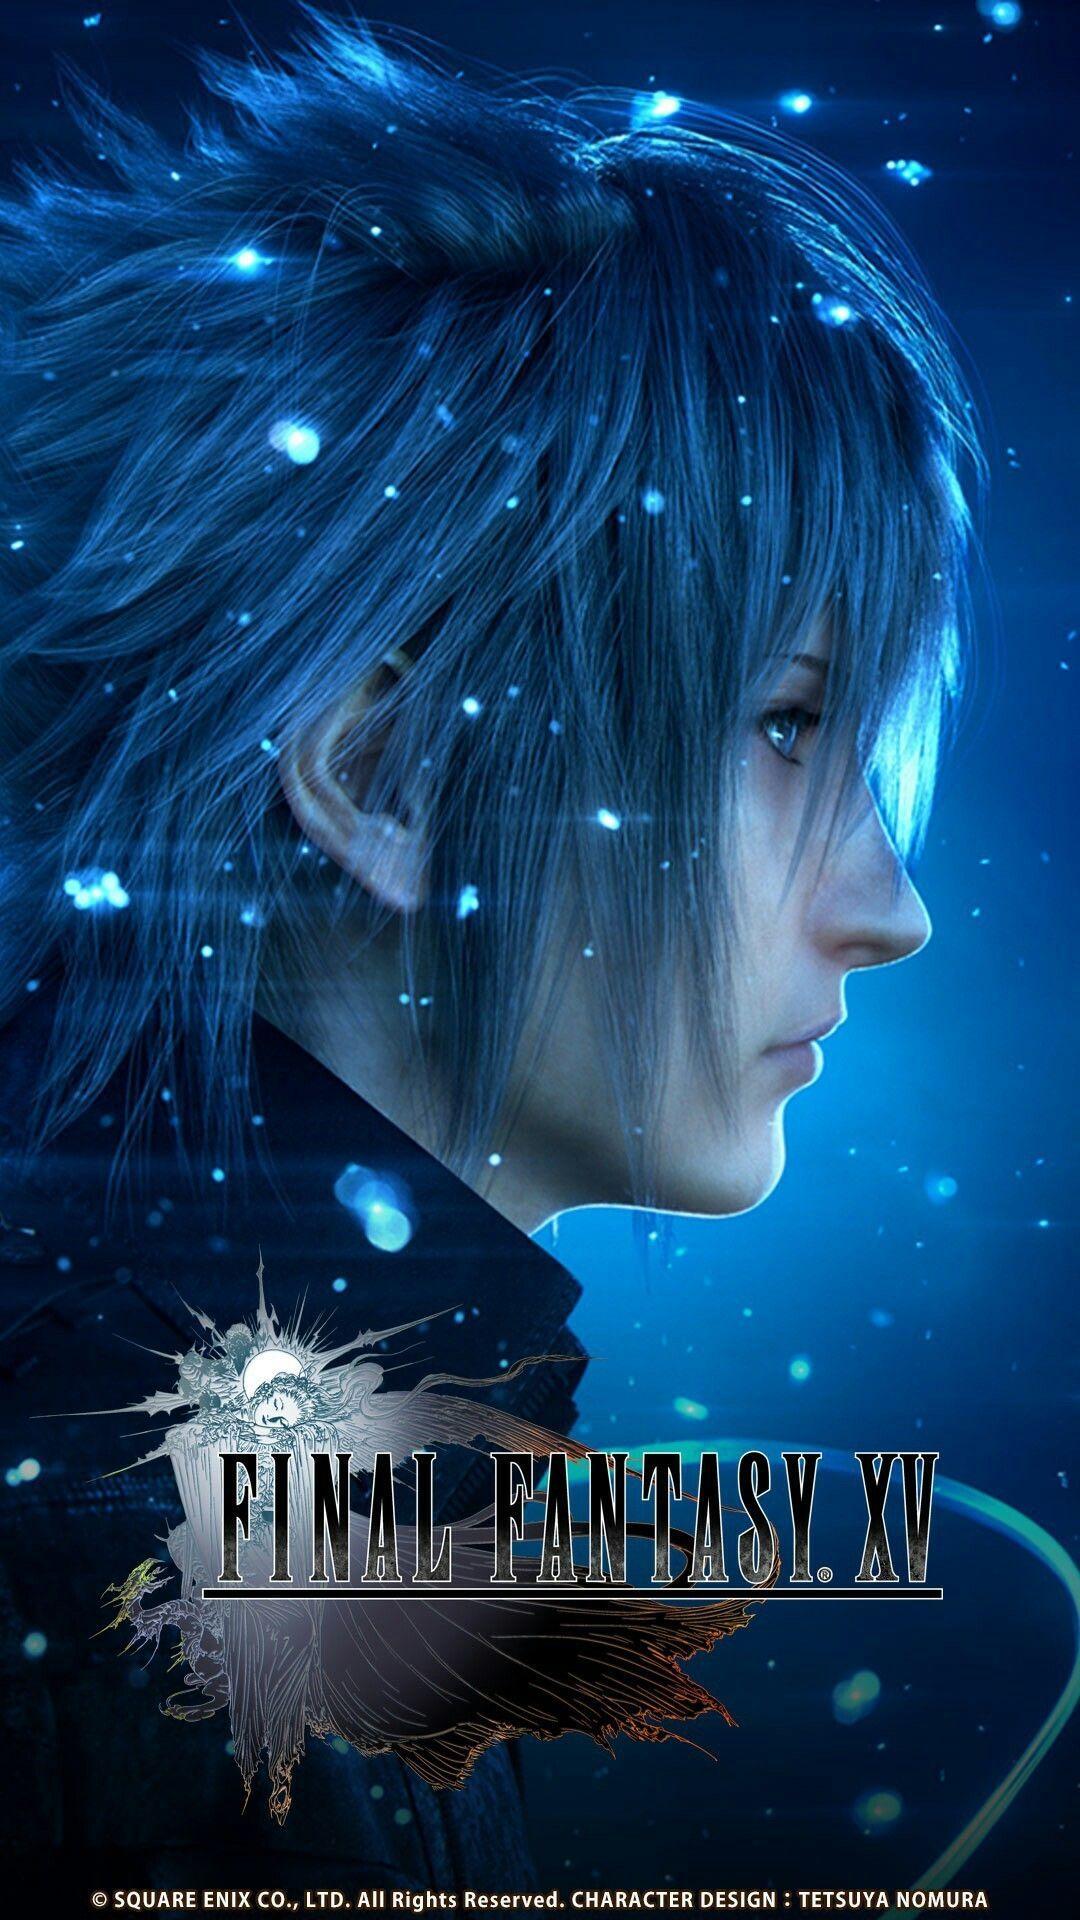 Final Fantasy 15 Noctis Wallpaper For Android On Wallpaper 1080p